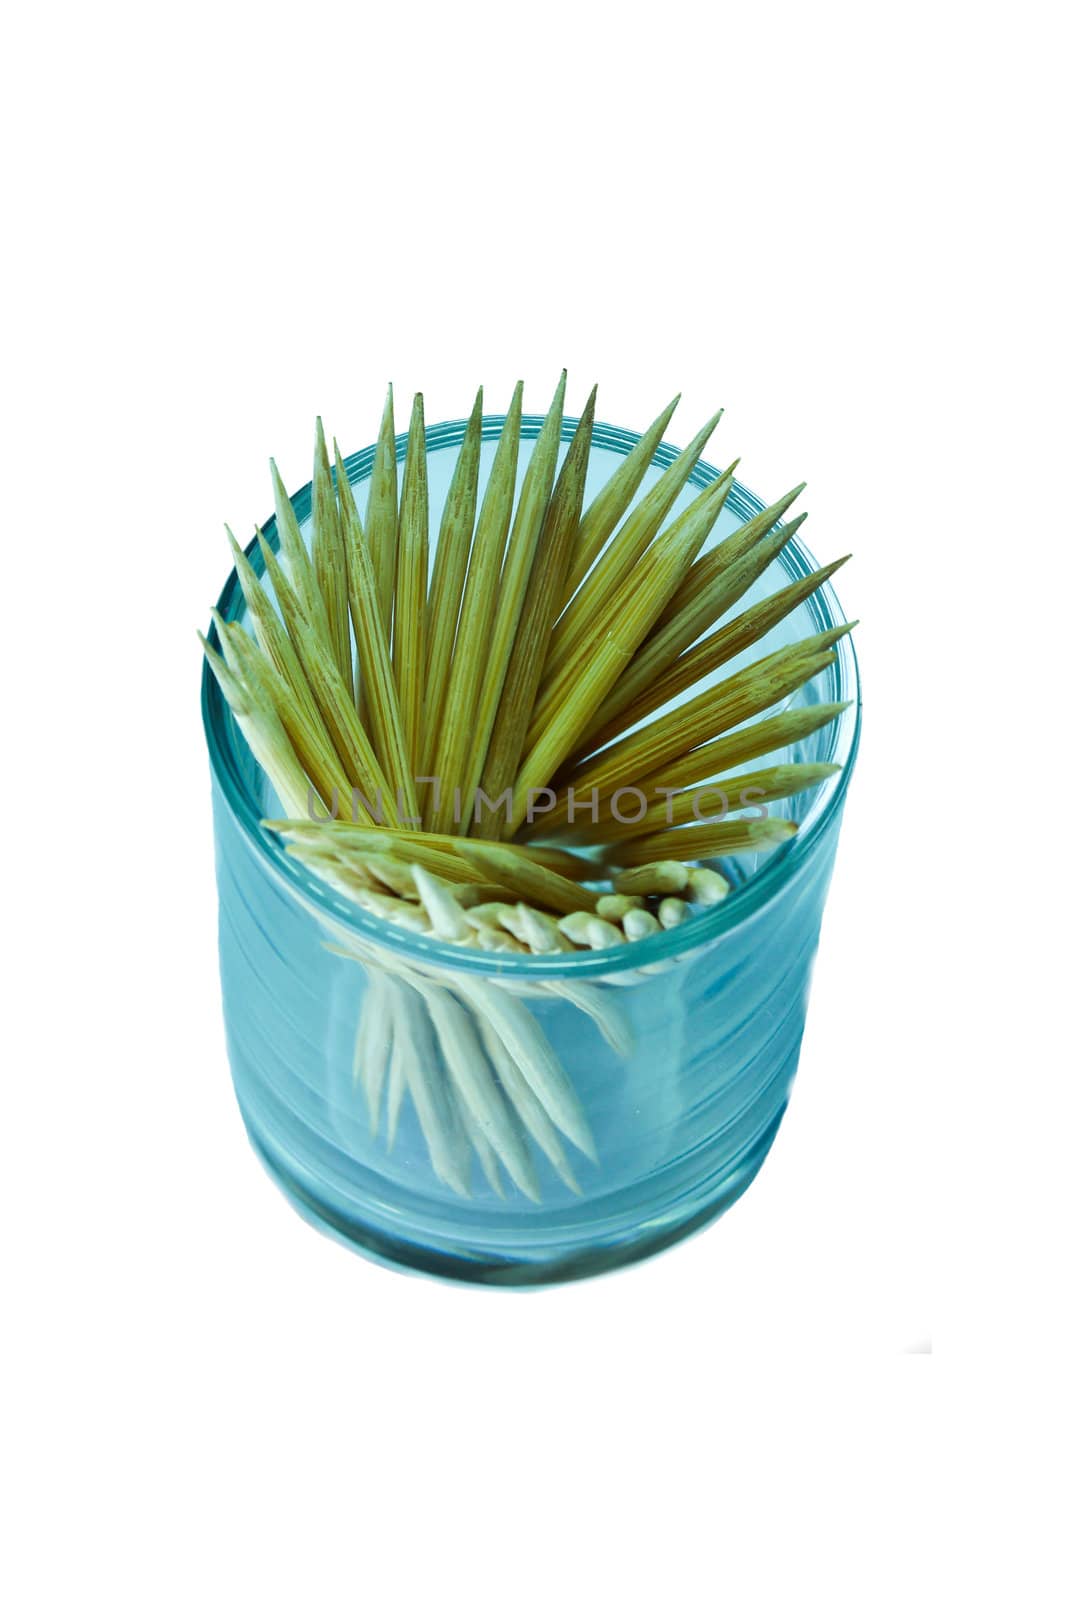 toothpicks in the bank on a white background by bajita111122